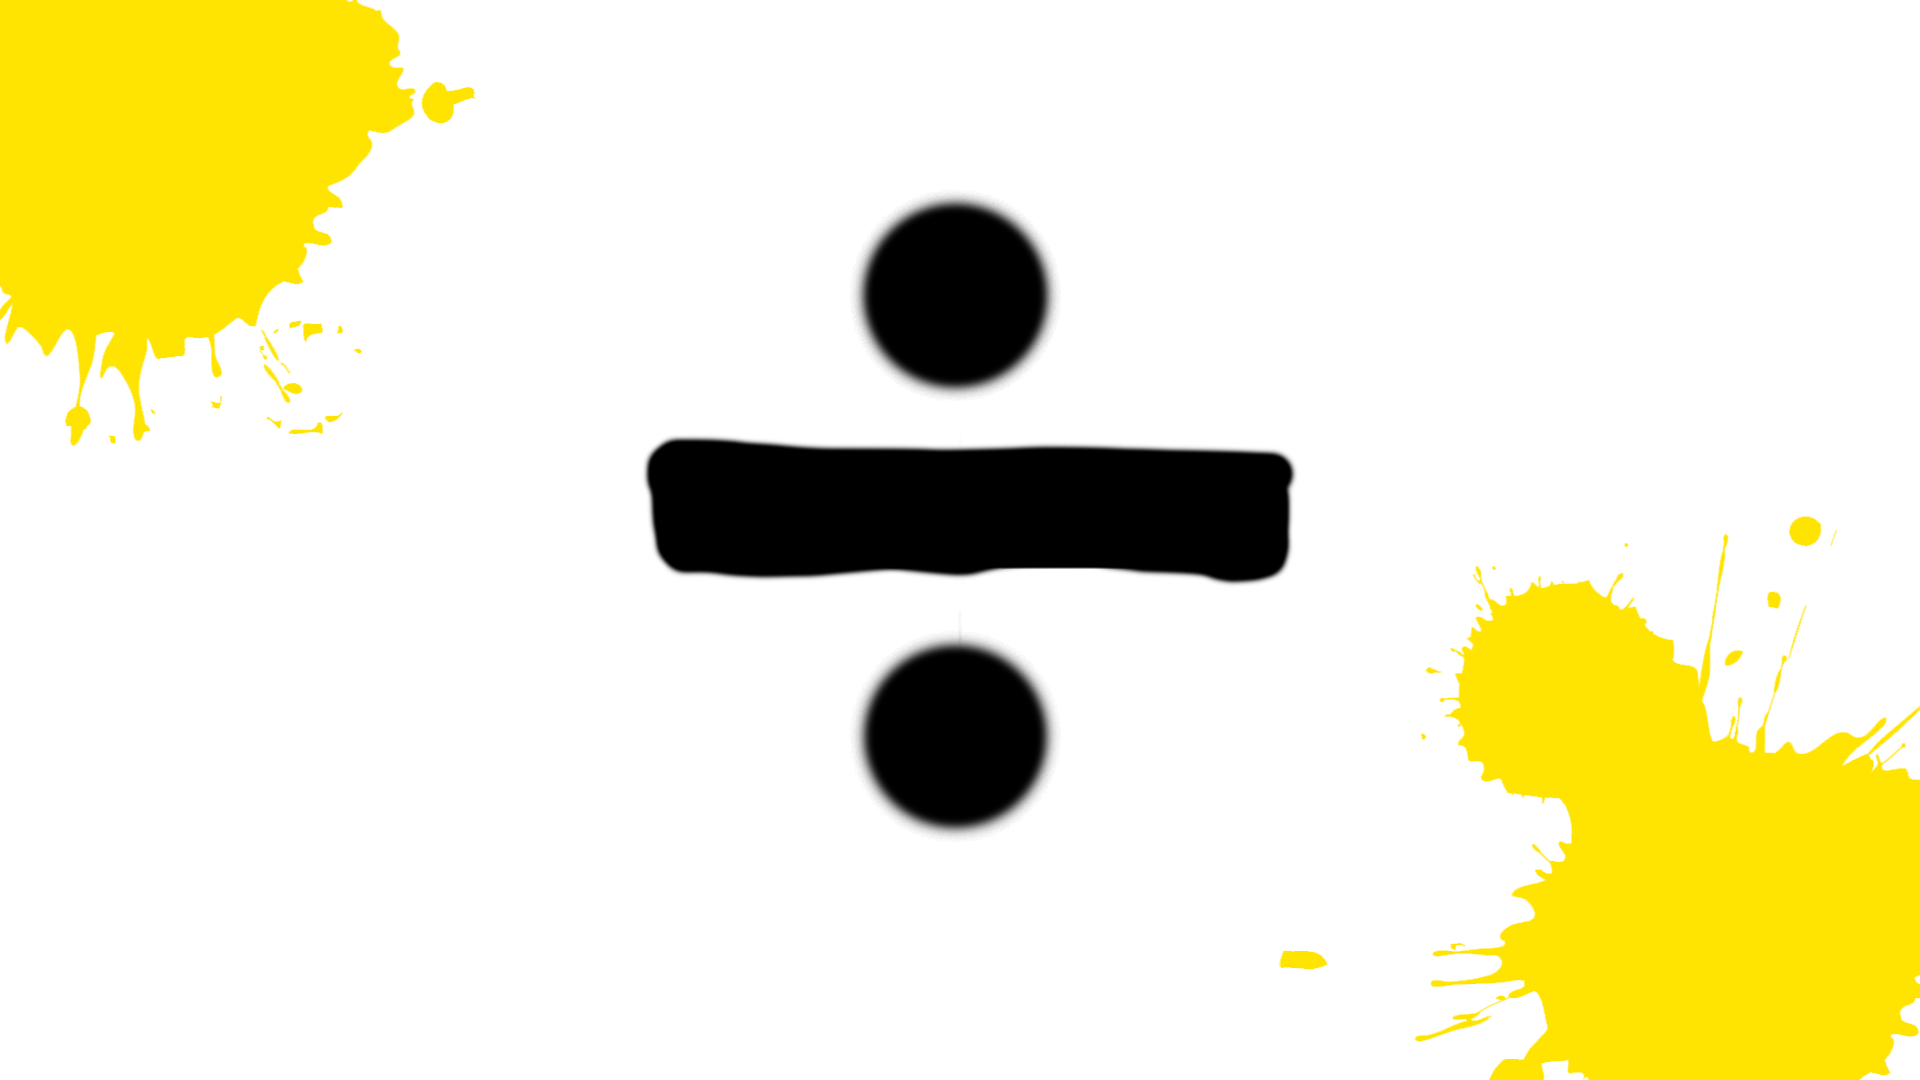 Maths symbol on white background with yellow splats